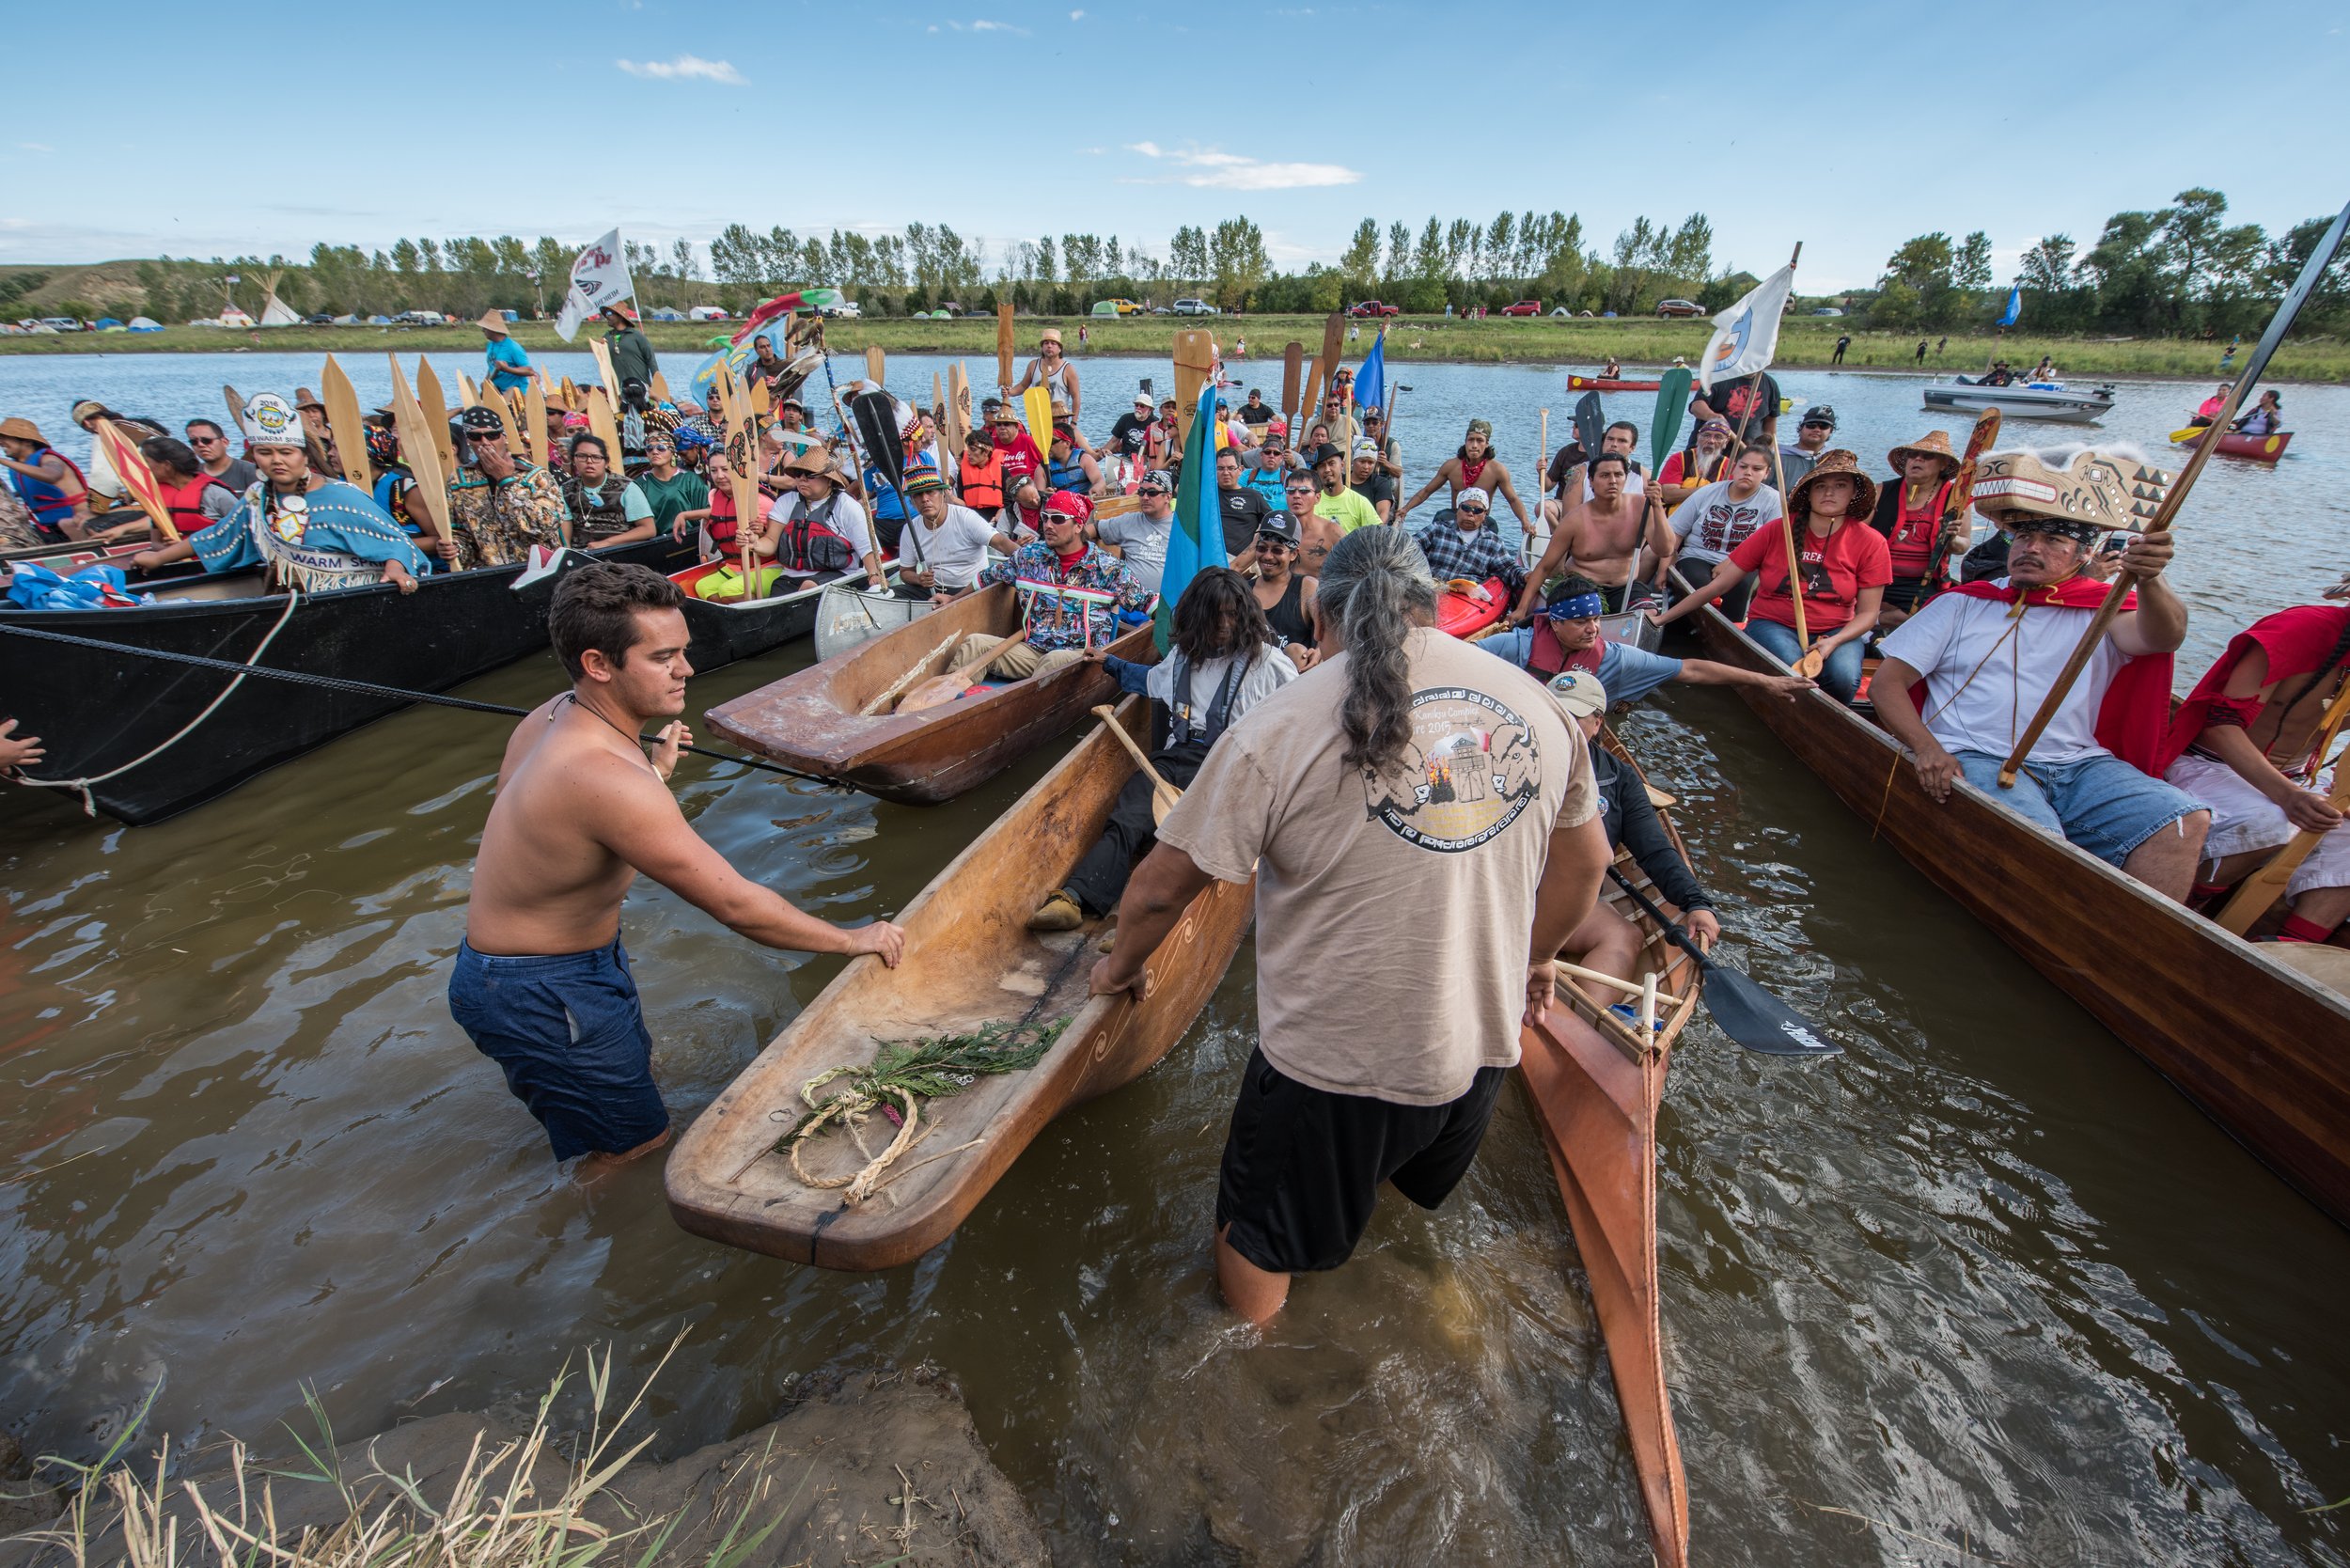  Tribes from the Pacific Northwest brought with them their traditional hand-carved canoes. In September of that year protestors - indigenous and non-indigenous alike,  participated in the re-enactment of a traditional Native ceremony when boats from 